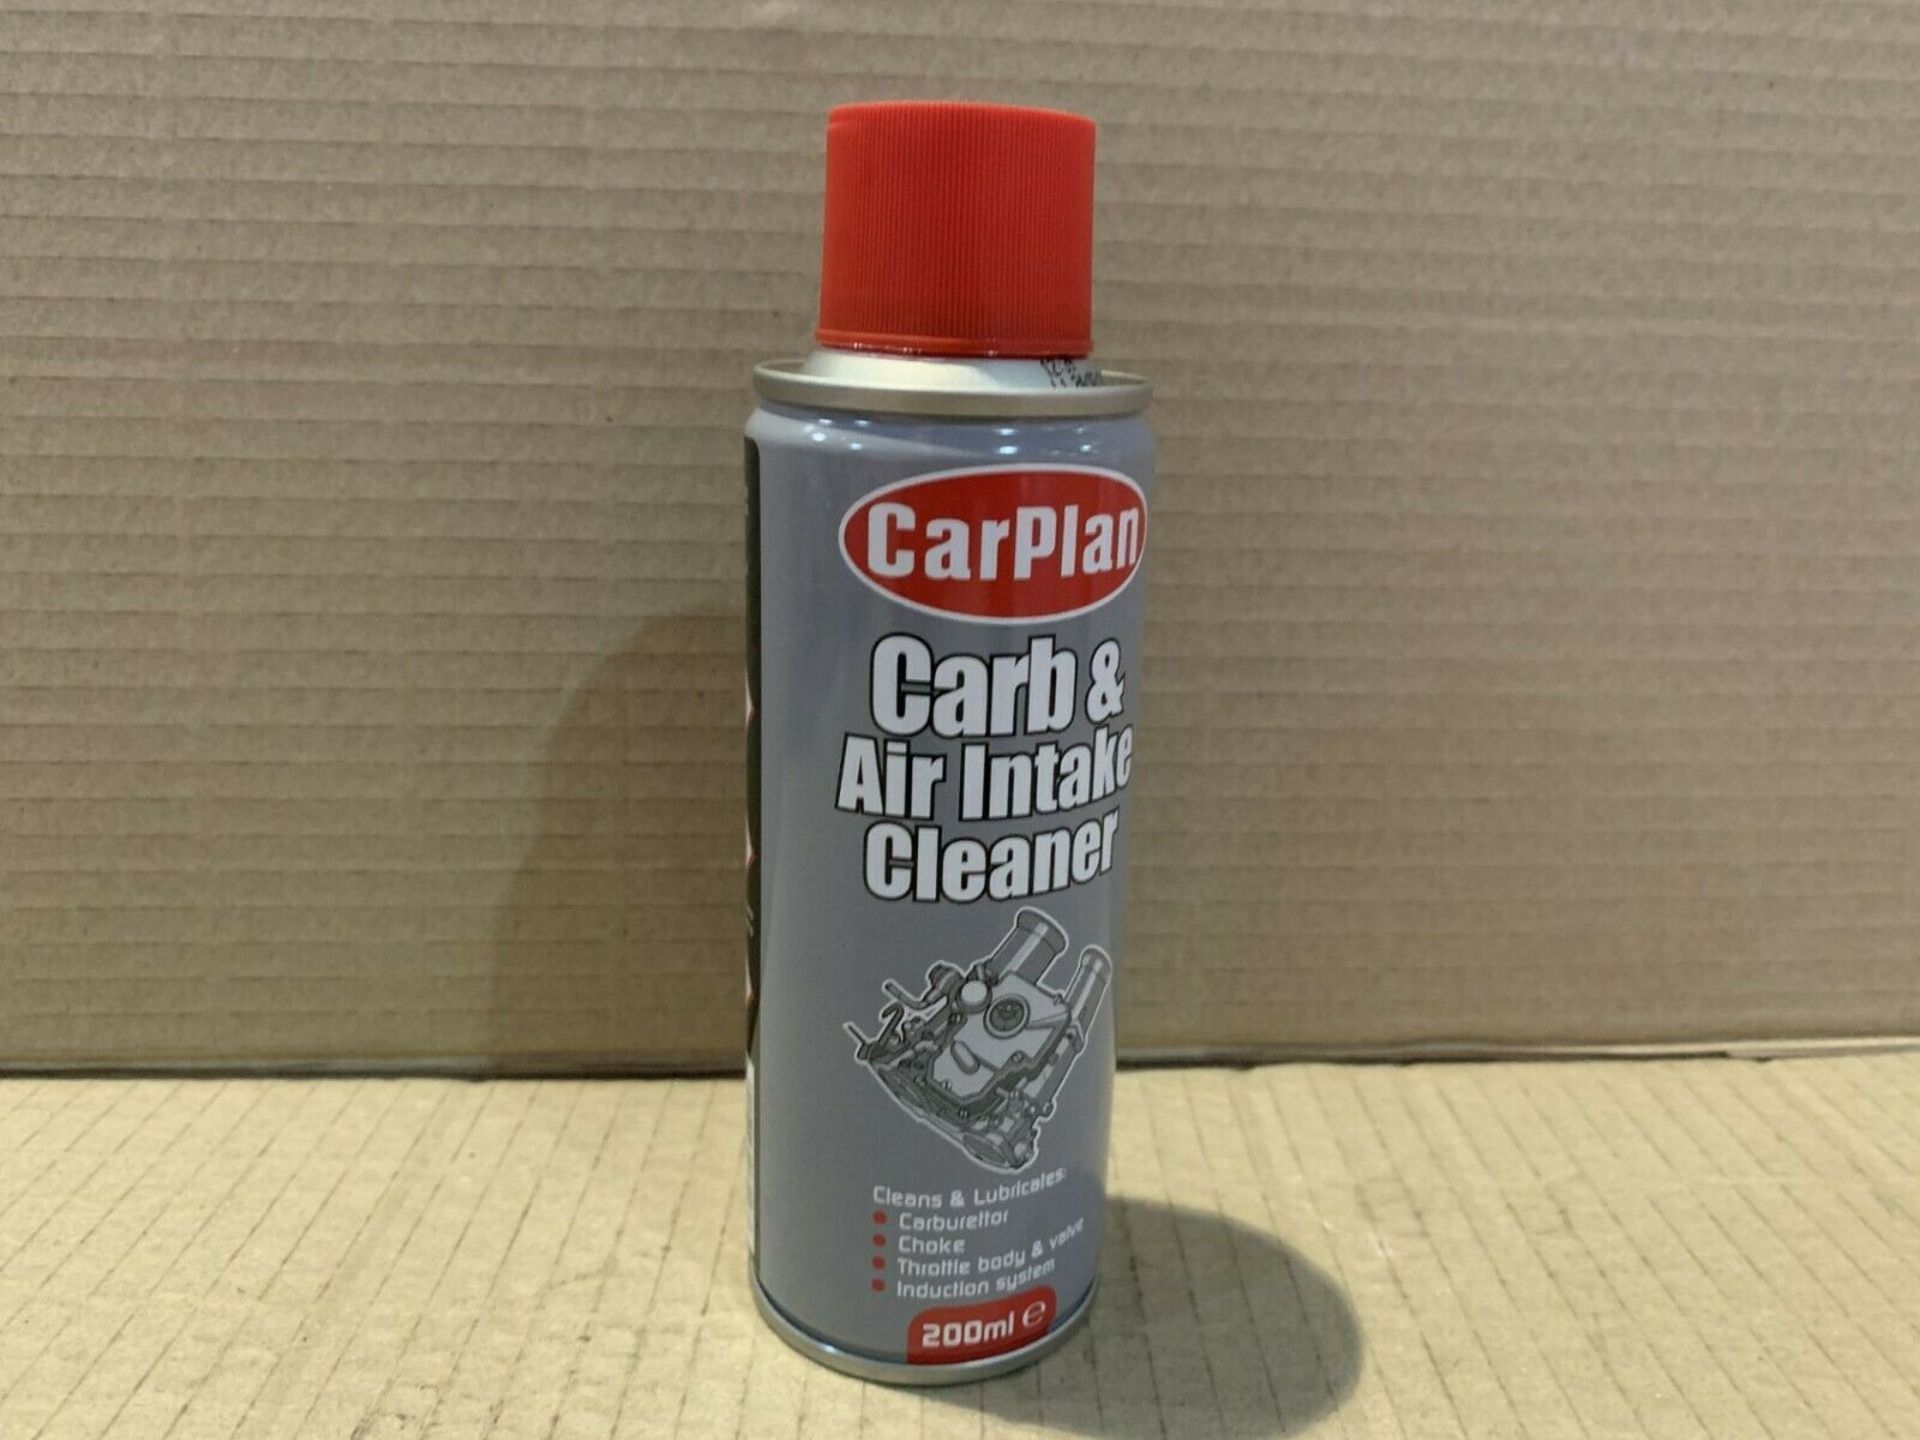 72 X BRAND NEW CARPLAN CARB AND AIR INTAKE CLEANER 200ML (ROW6)